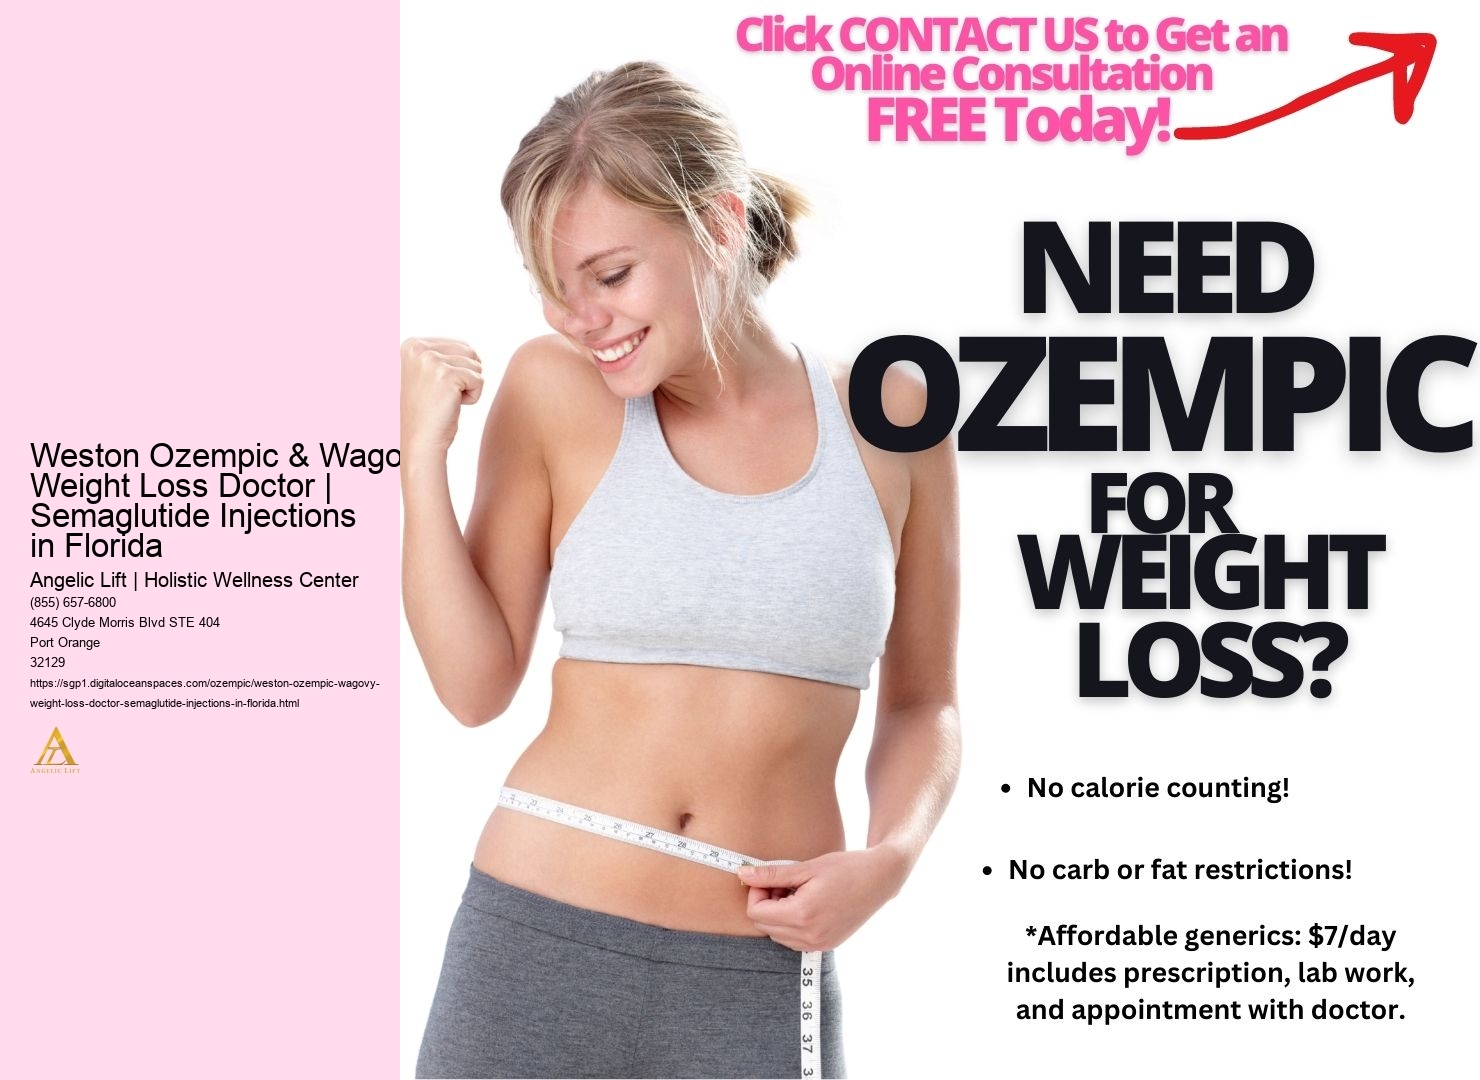 Weston Ozempic & Wagovy Weight Loss Doctor | Semaglutide Injections in Florida